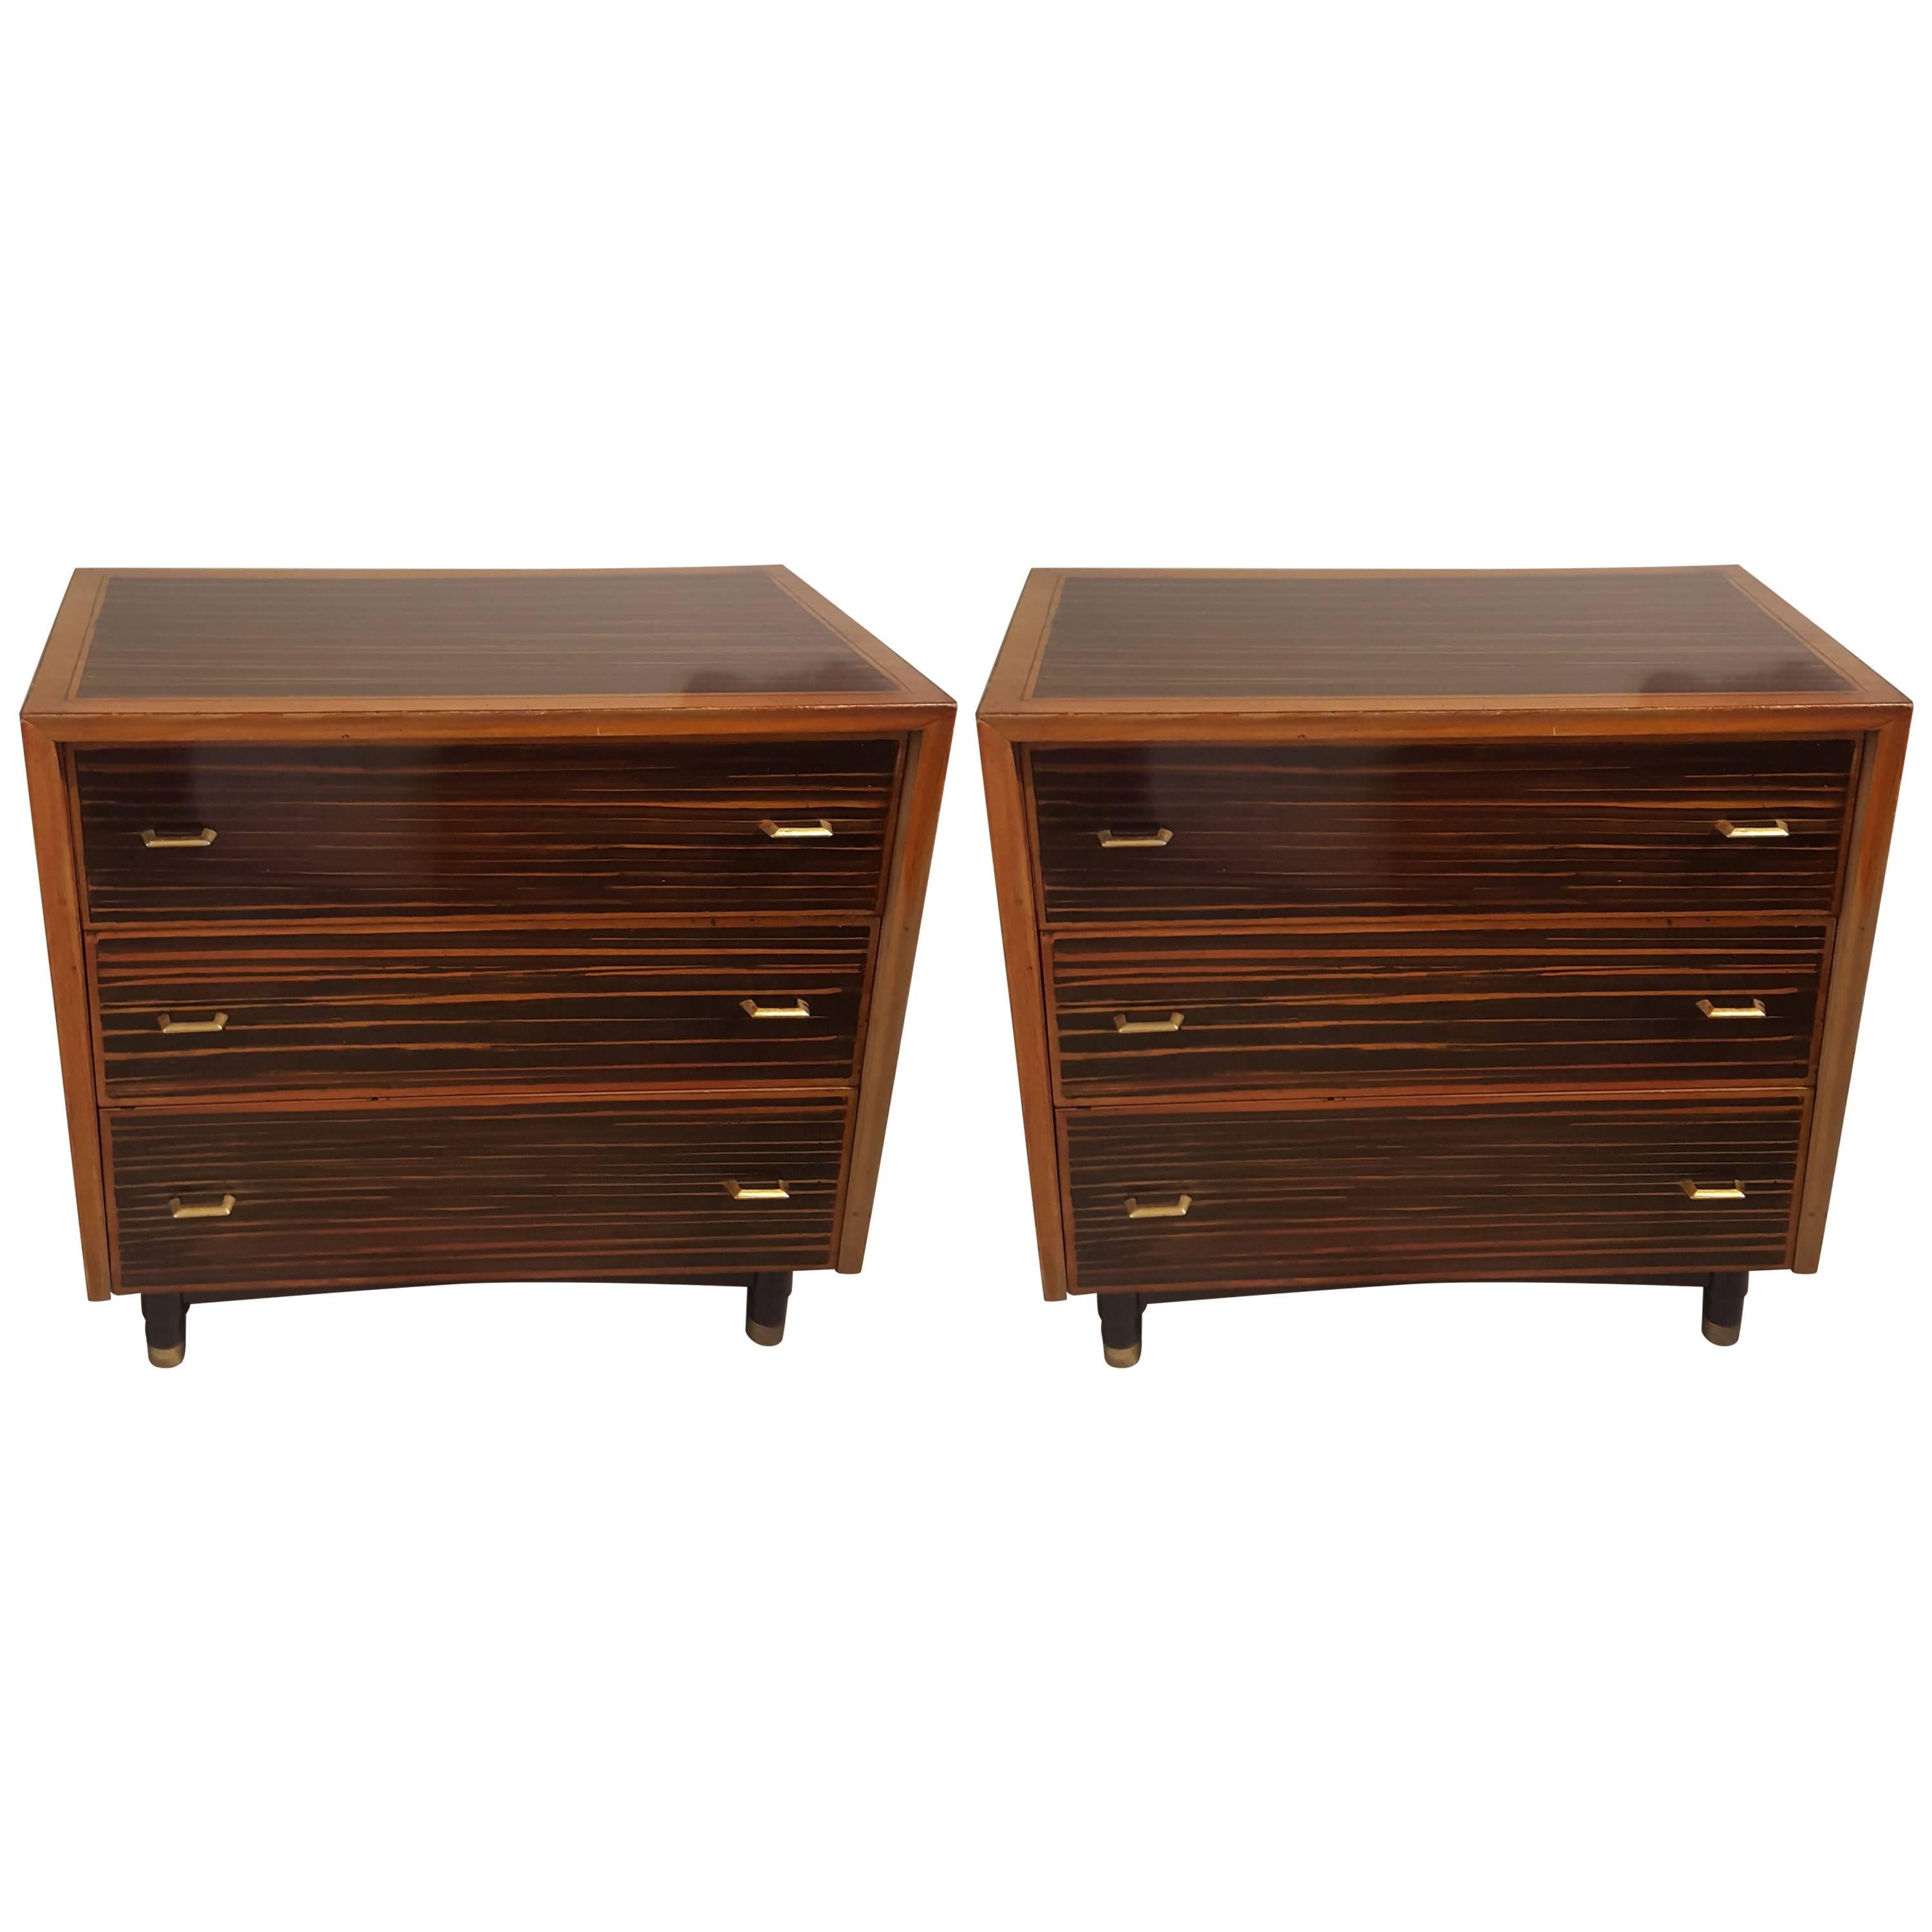 Pair of Faux-Bois Chests of Drawers